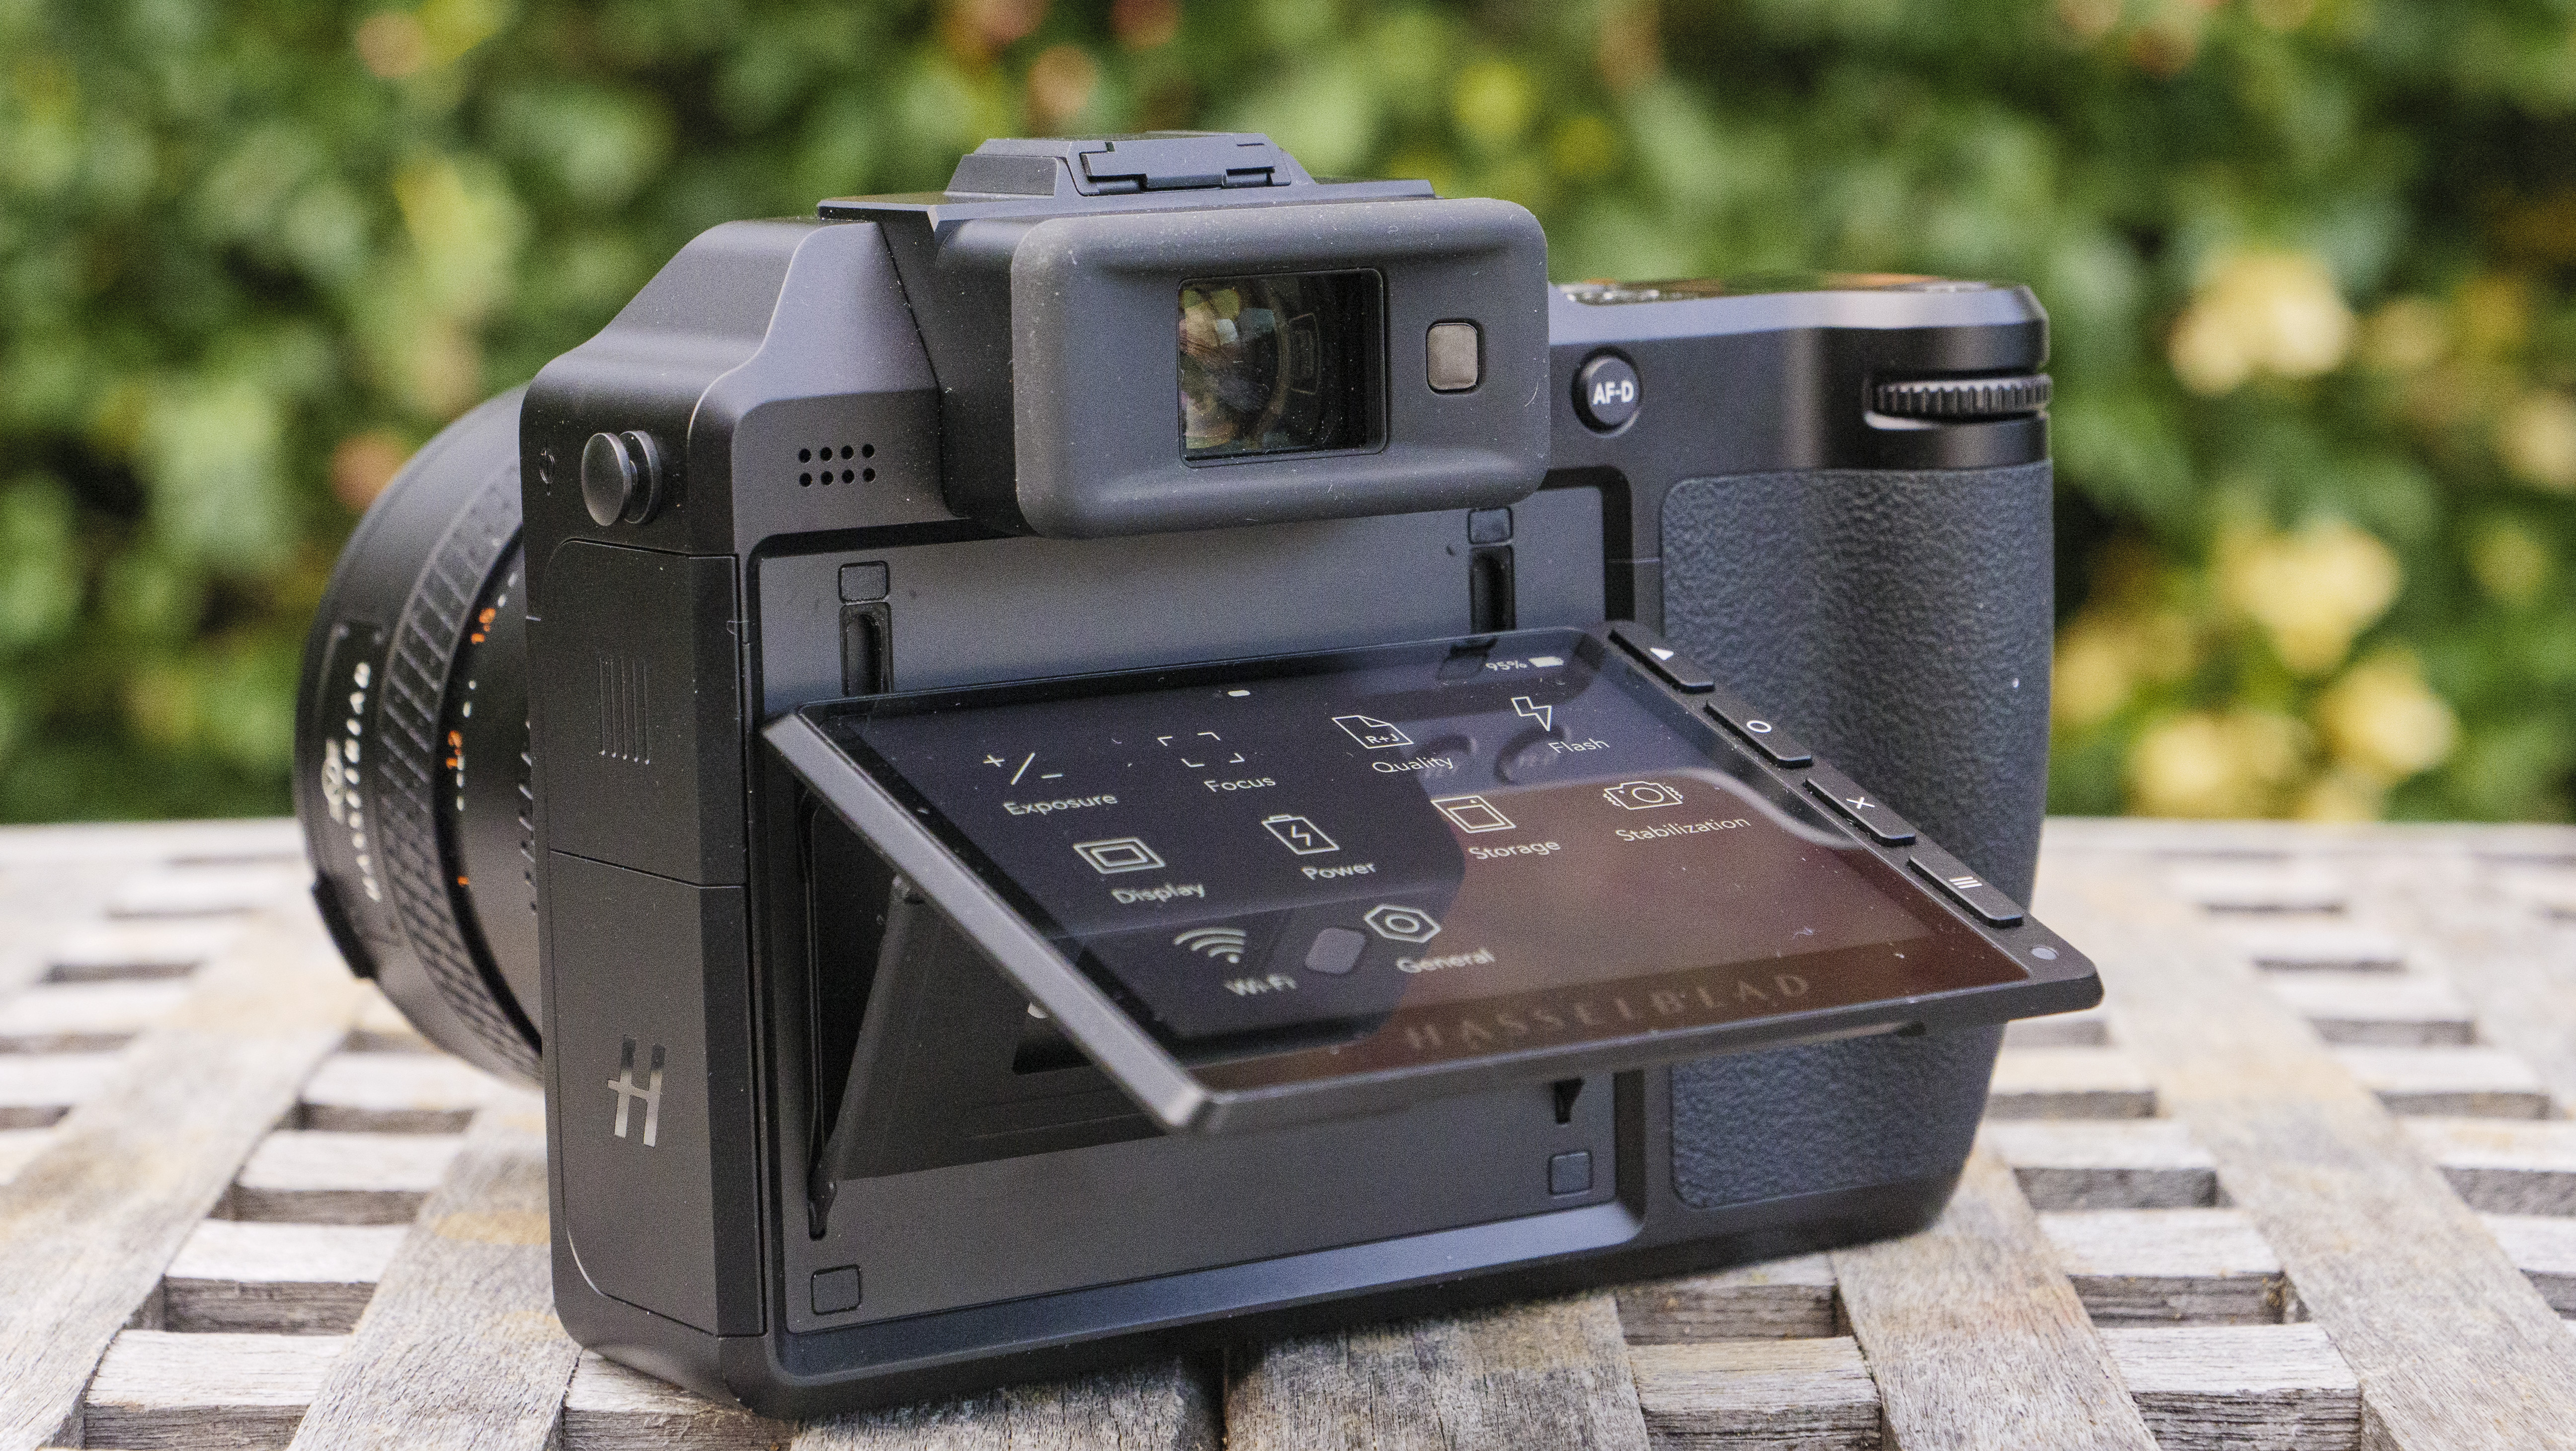 The Hasselblad X2D 100C camera with tilt screen